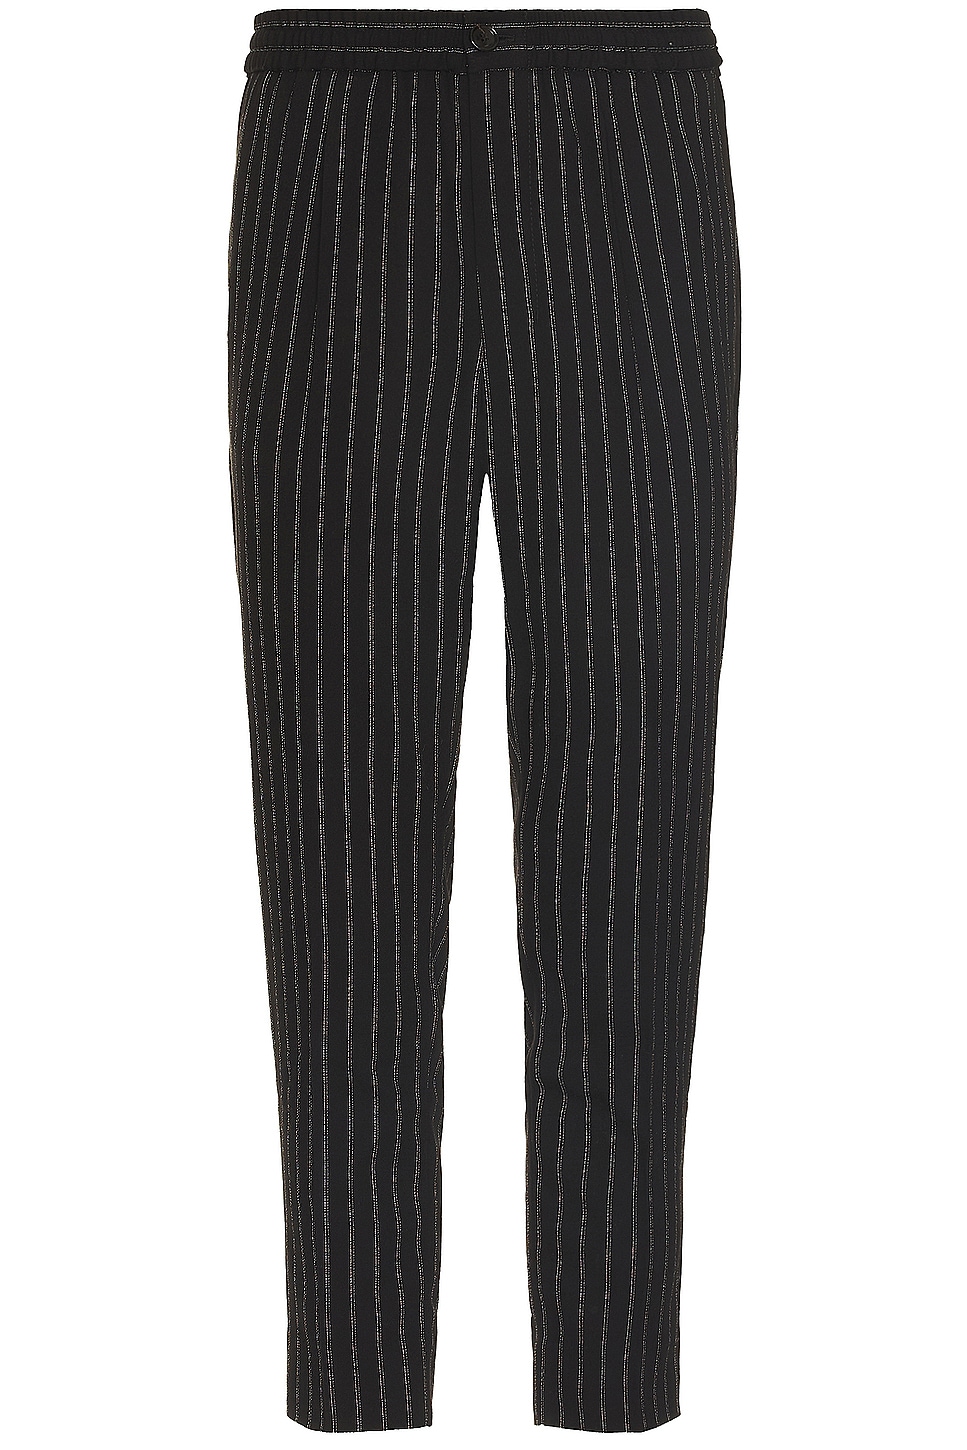 Image 1 of ami Elasticated Waist Pant in Black & Chalk